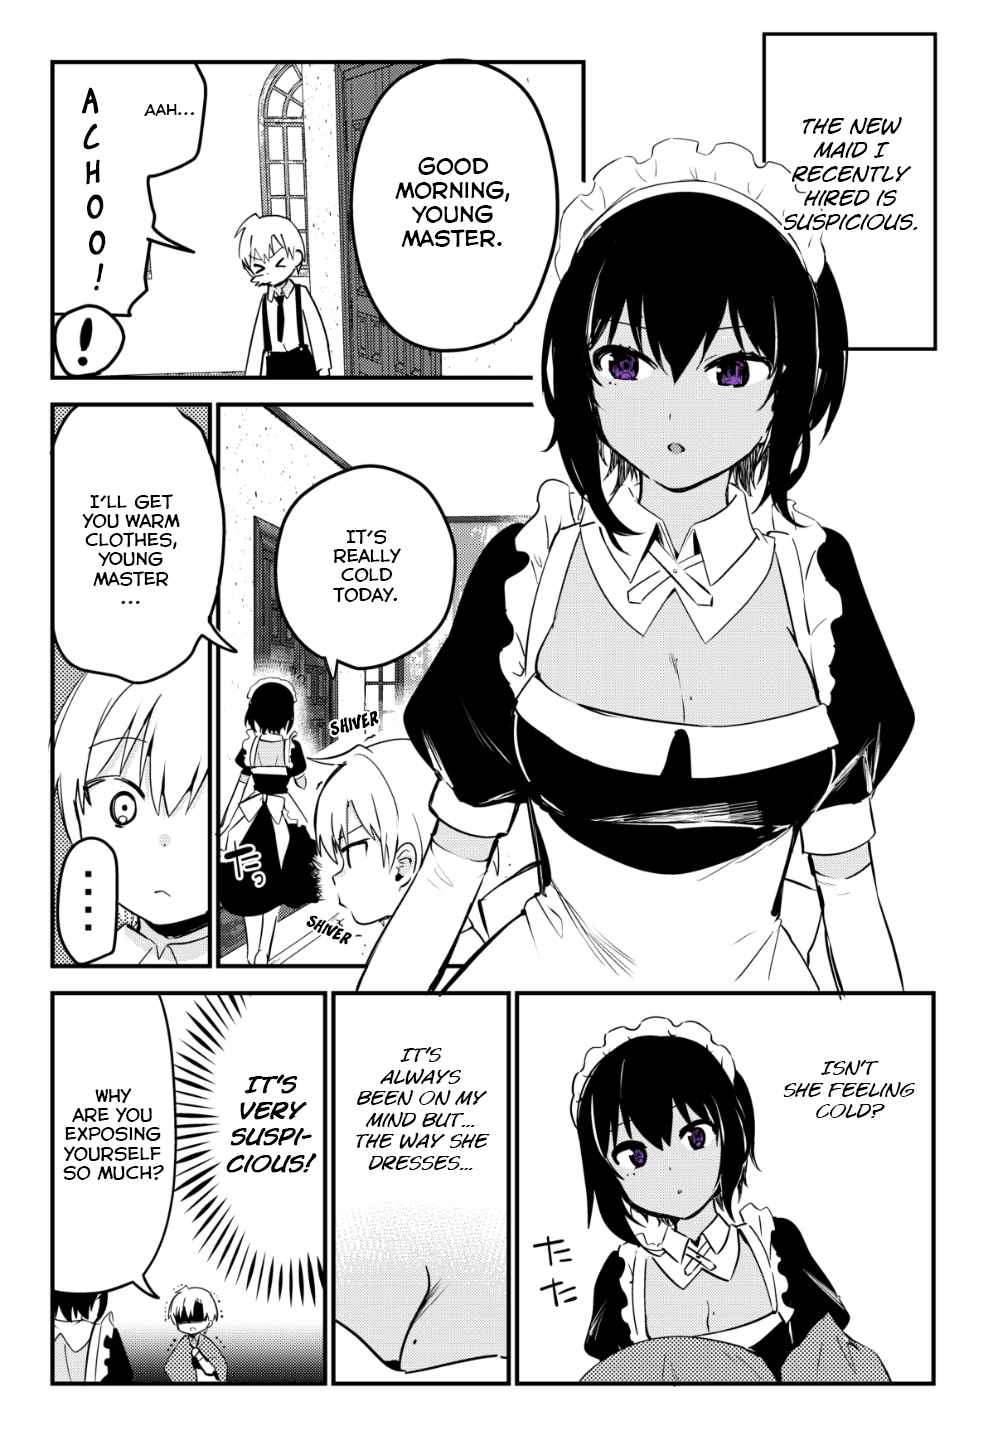 My Recently Hired Maid Is Suspicious Ch. 6